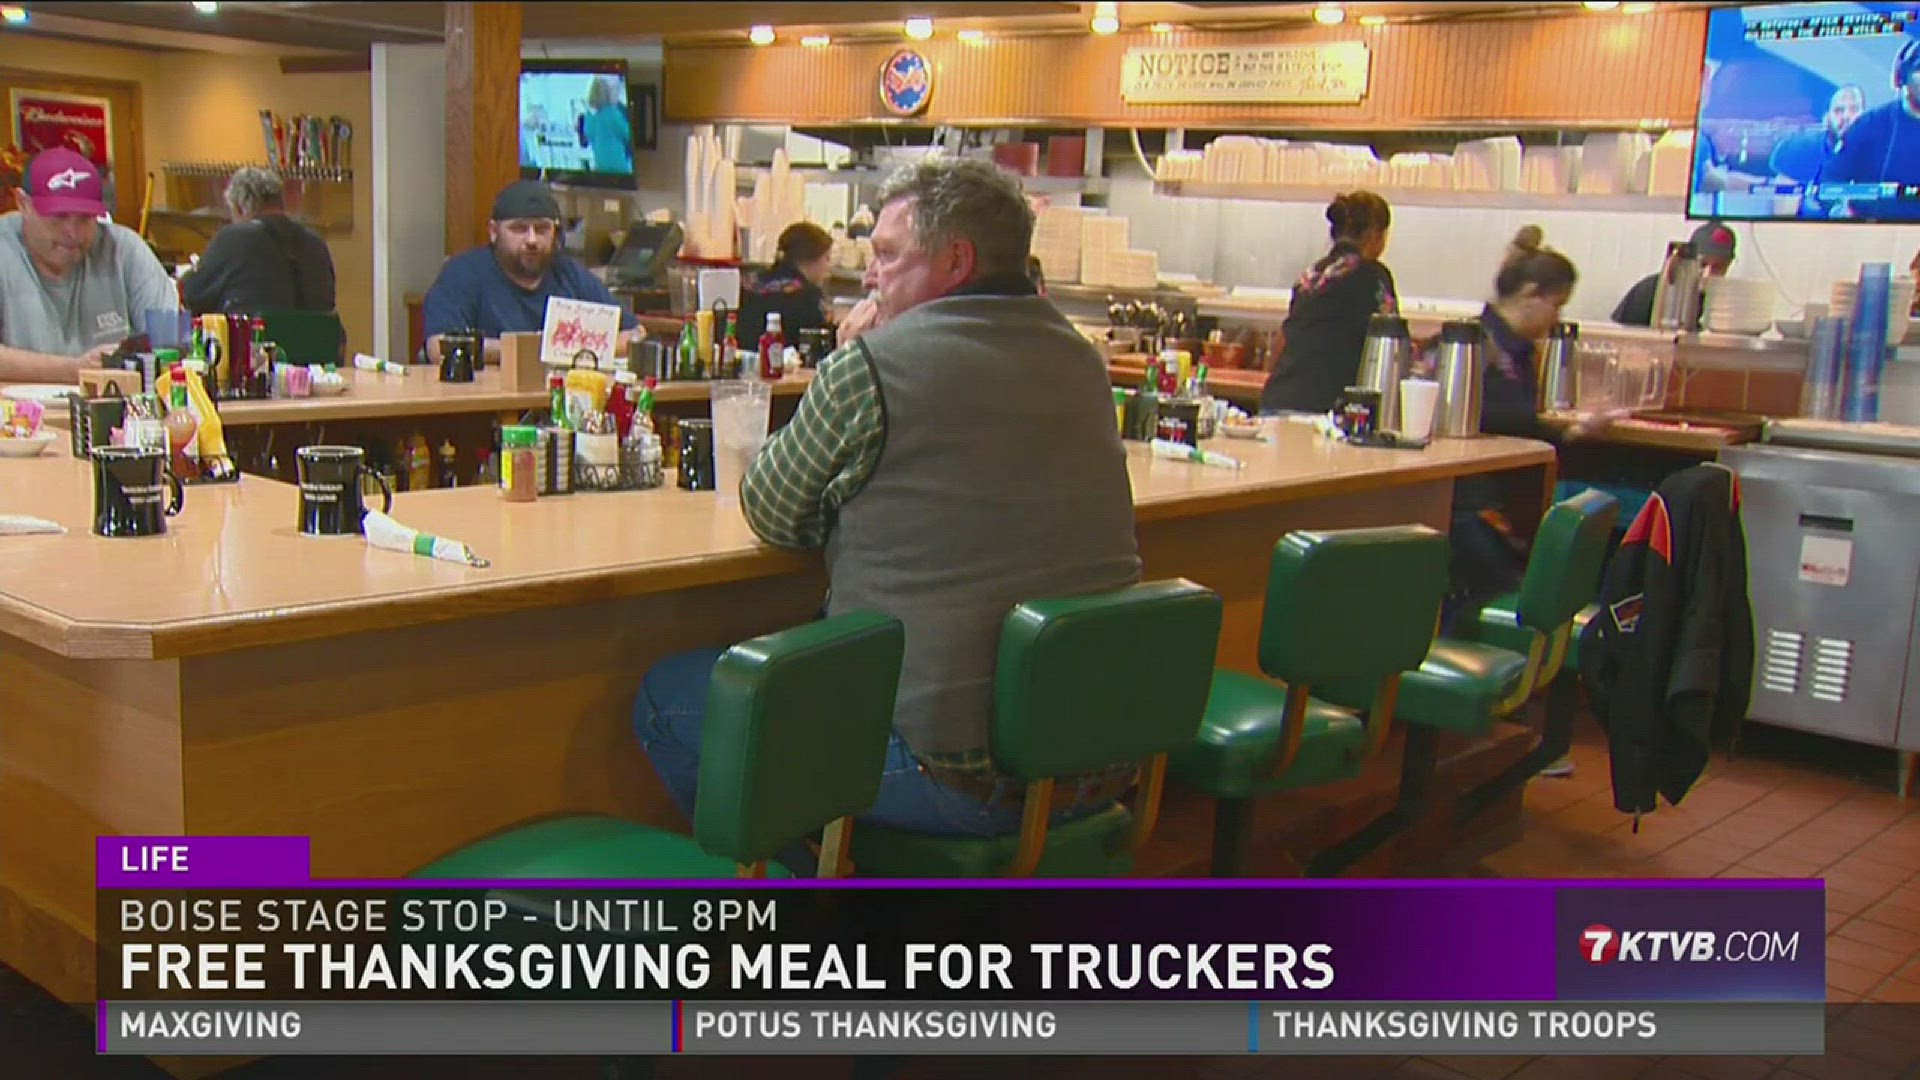 Free Thanksgiving meals for truckers.